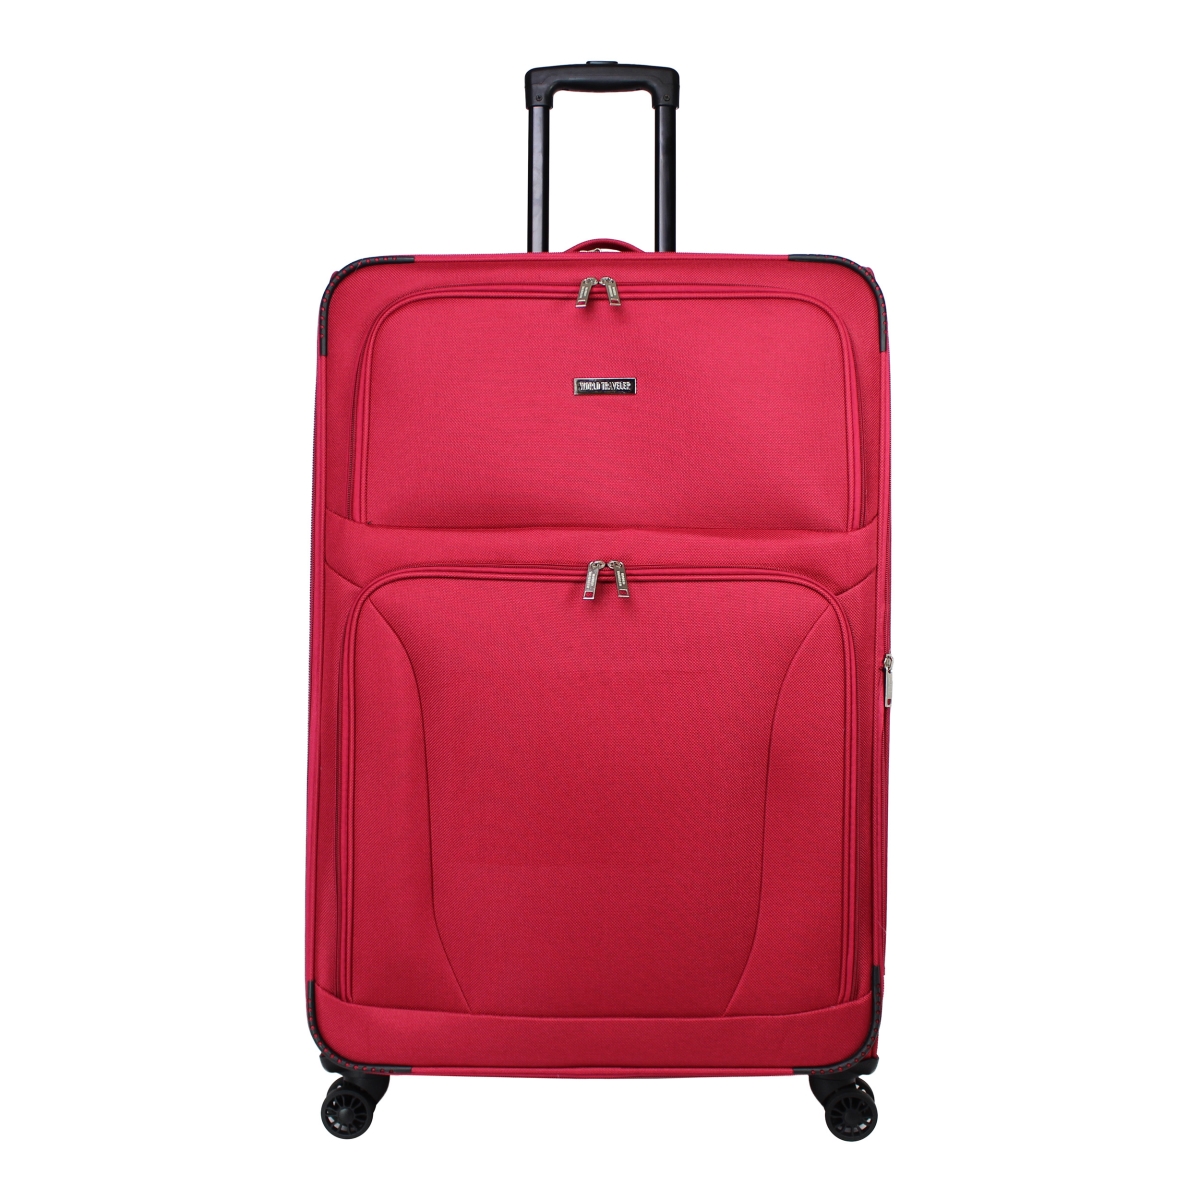 Wt100-30-red 30 In. Embarque Collection Super Lightweight Spinner Upright Suitcase - Red